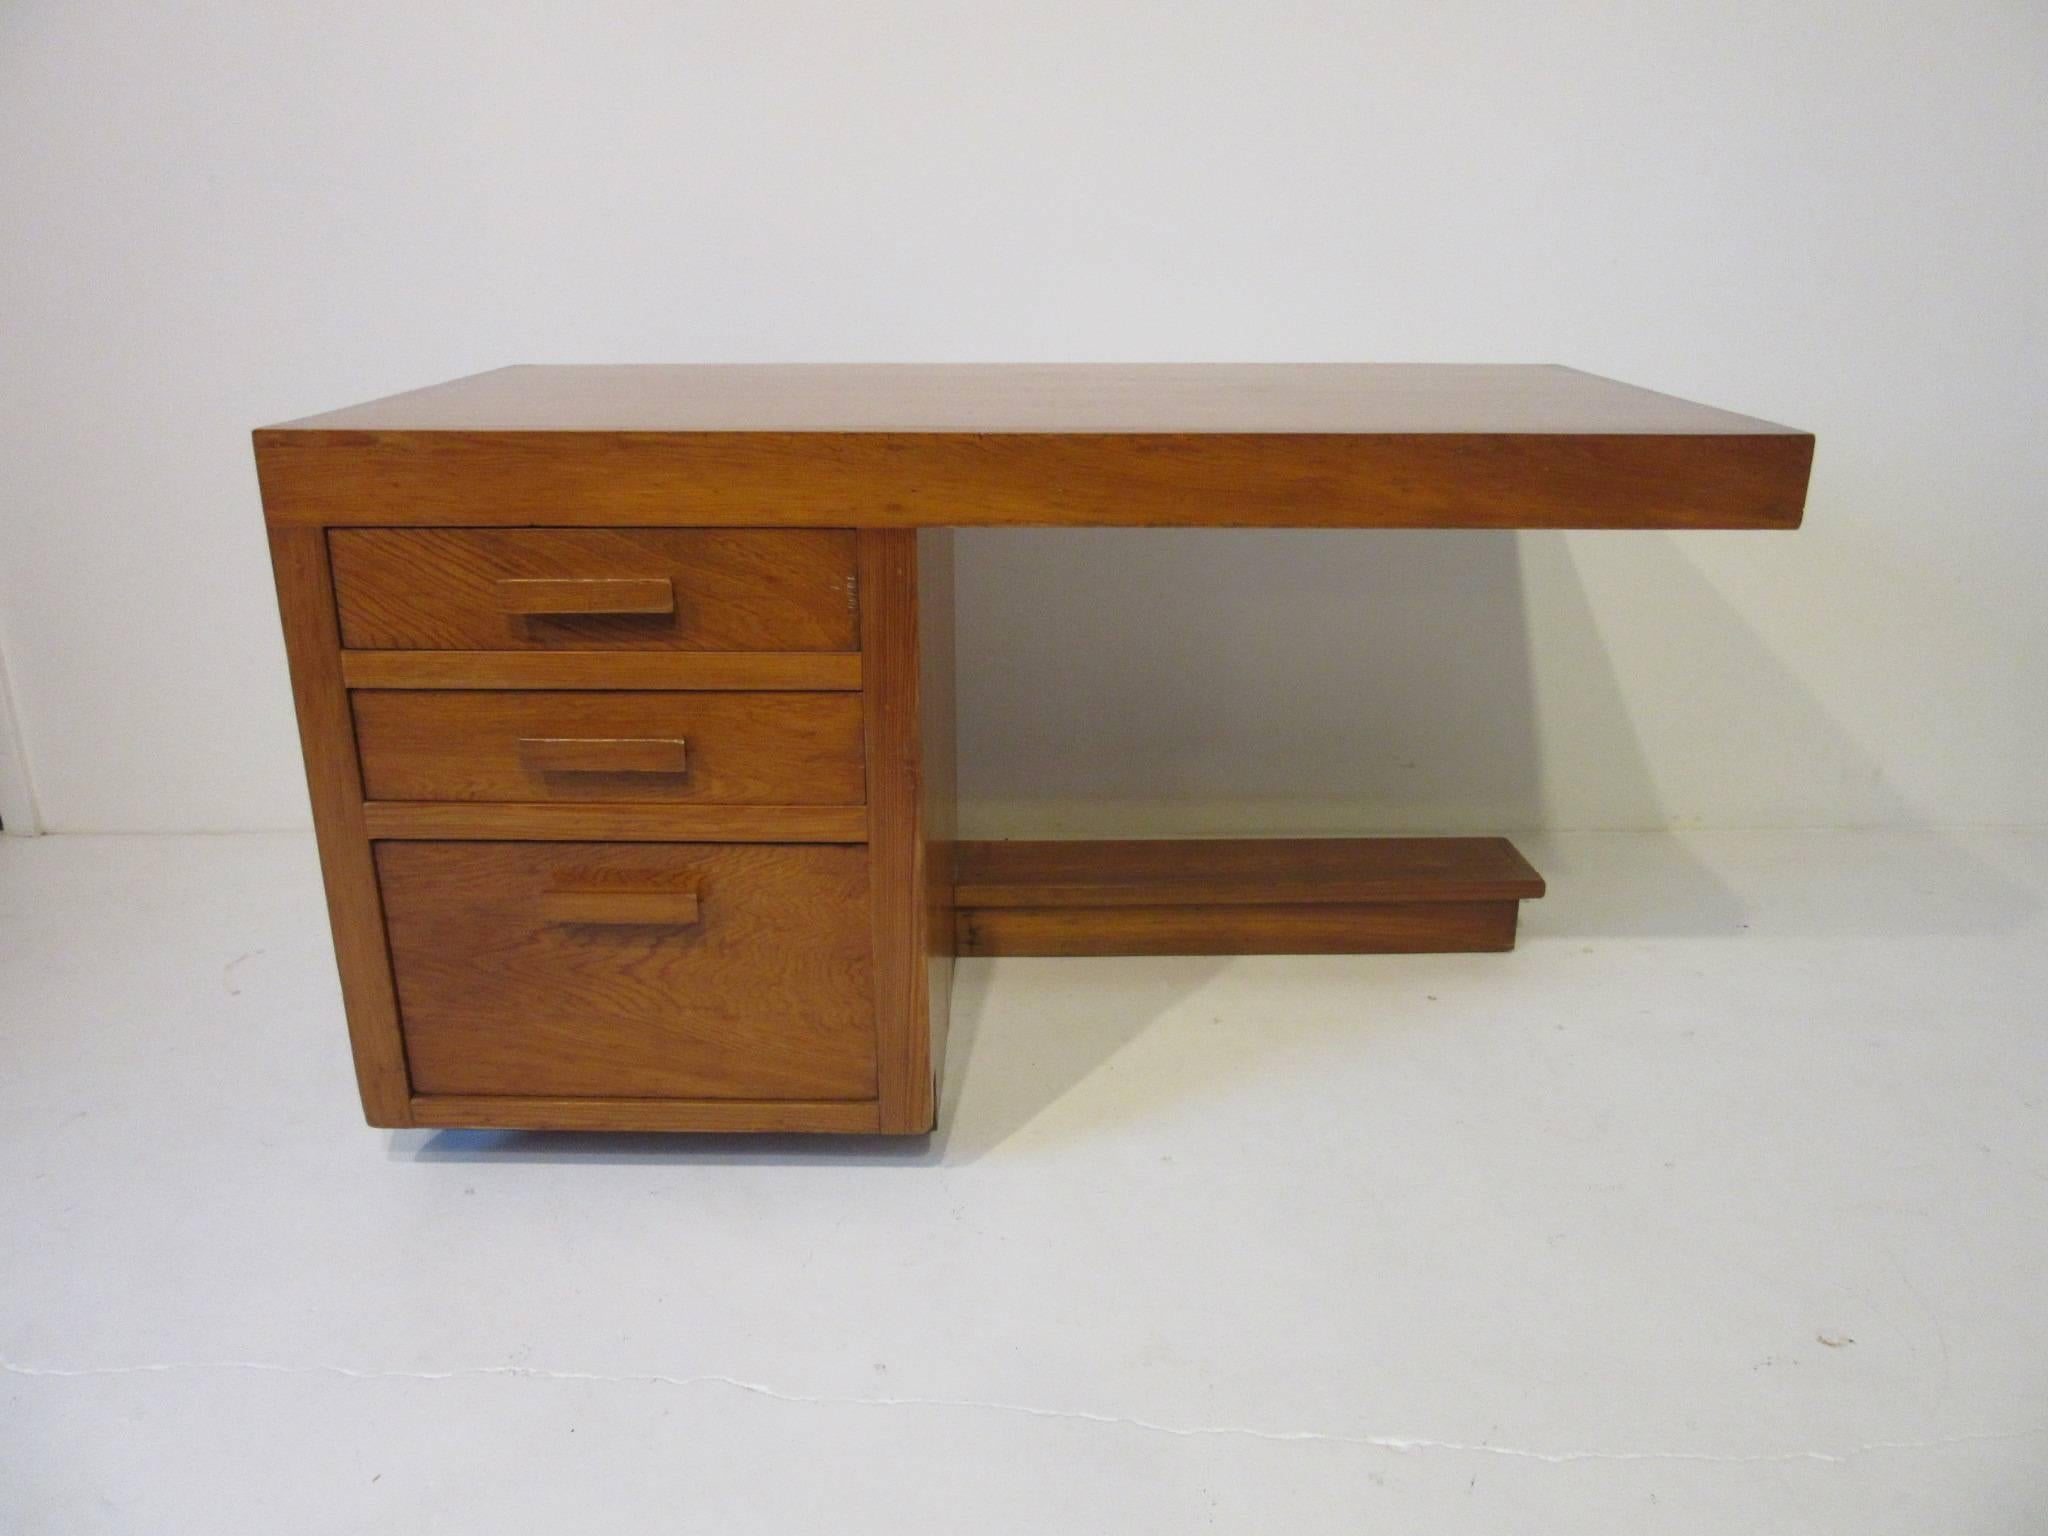 An important and rare Frank Lloyd Wright desk made for the Levin House in Kalamazoo Michigan. This desk comes from the first house built in Parkwyn Village a planned Community of Usonian homes. Formed by a group of forward thinking employees of the